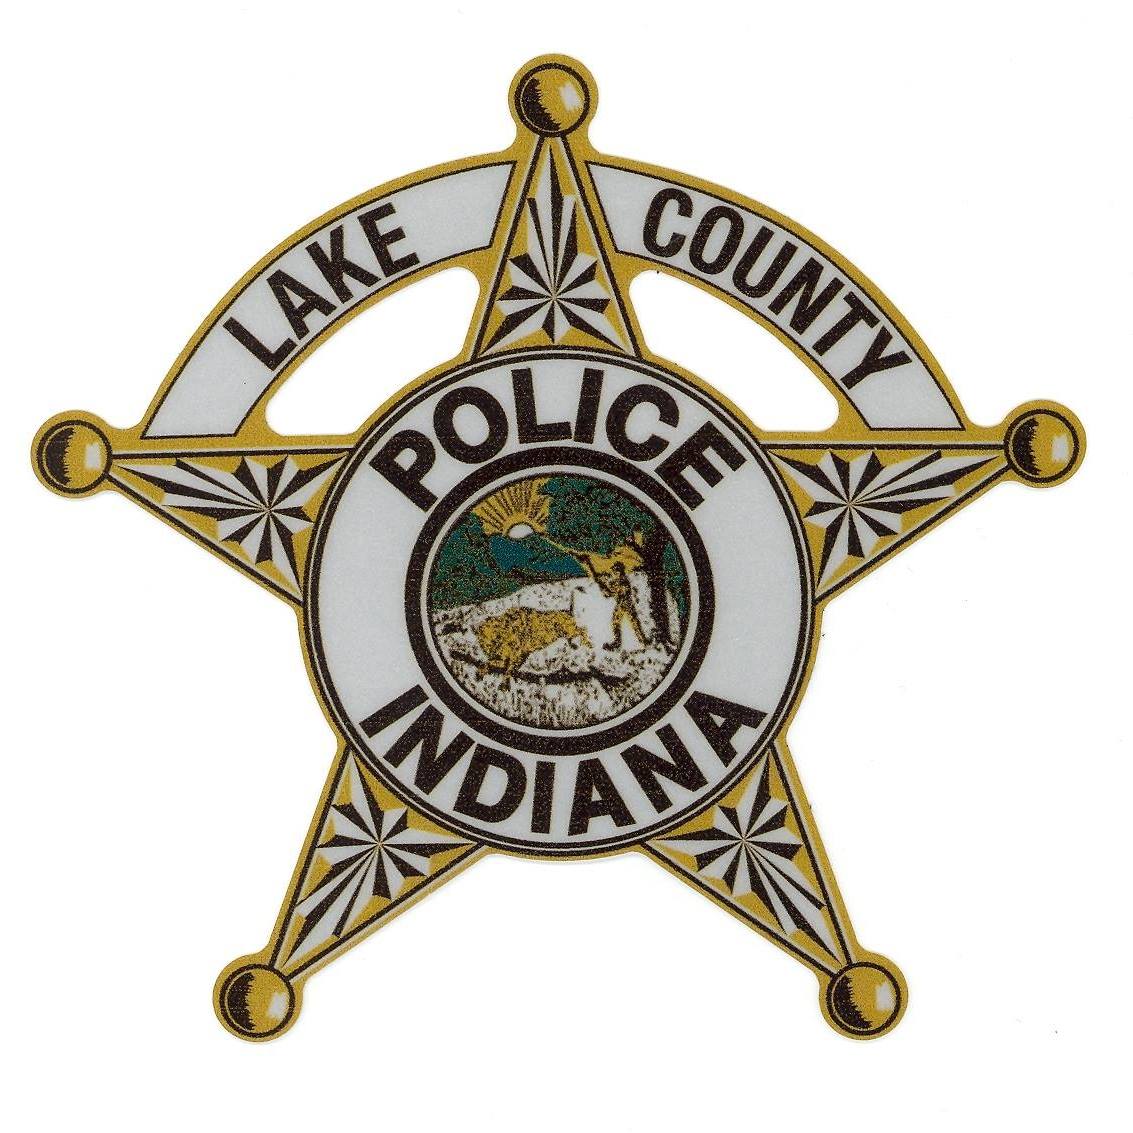 Lake County Sheriff's Department, IN Public Safety Jobs